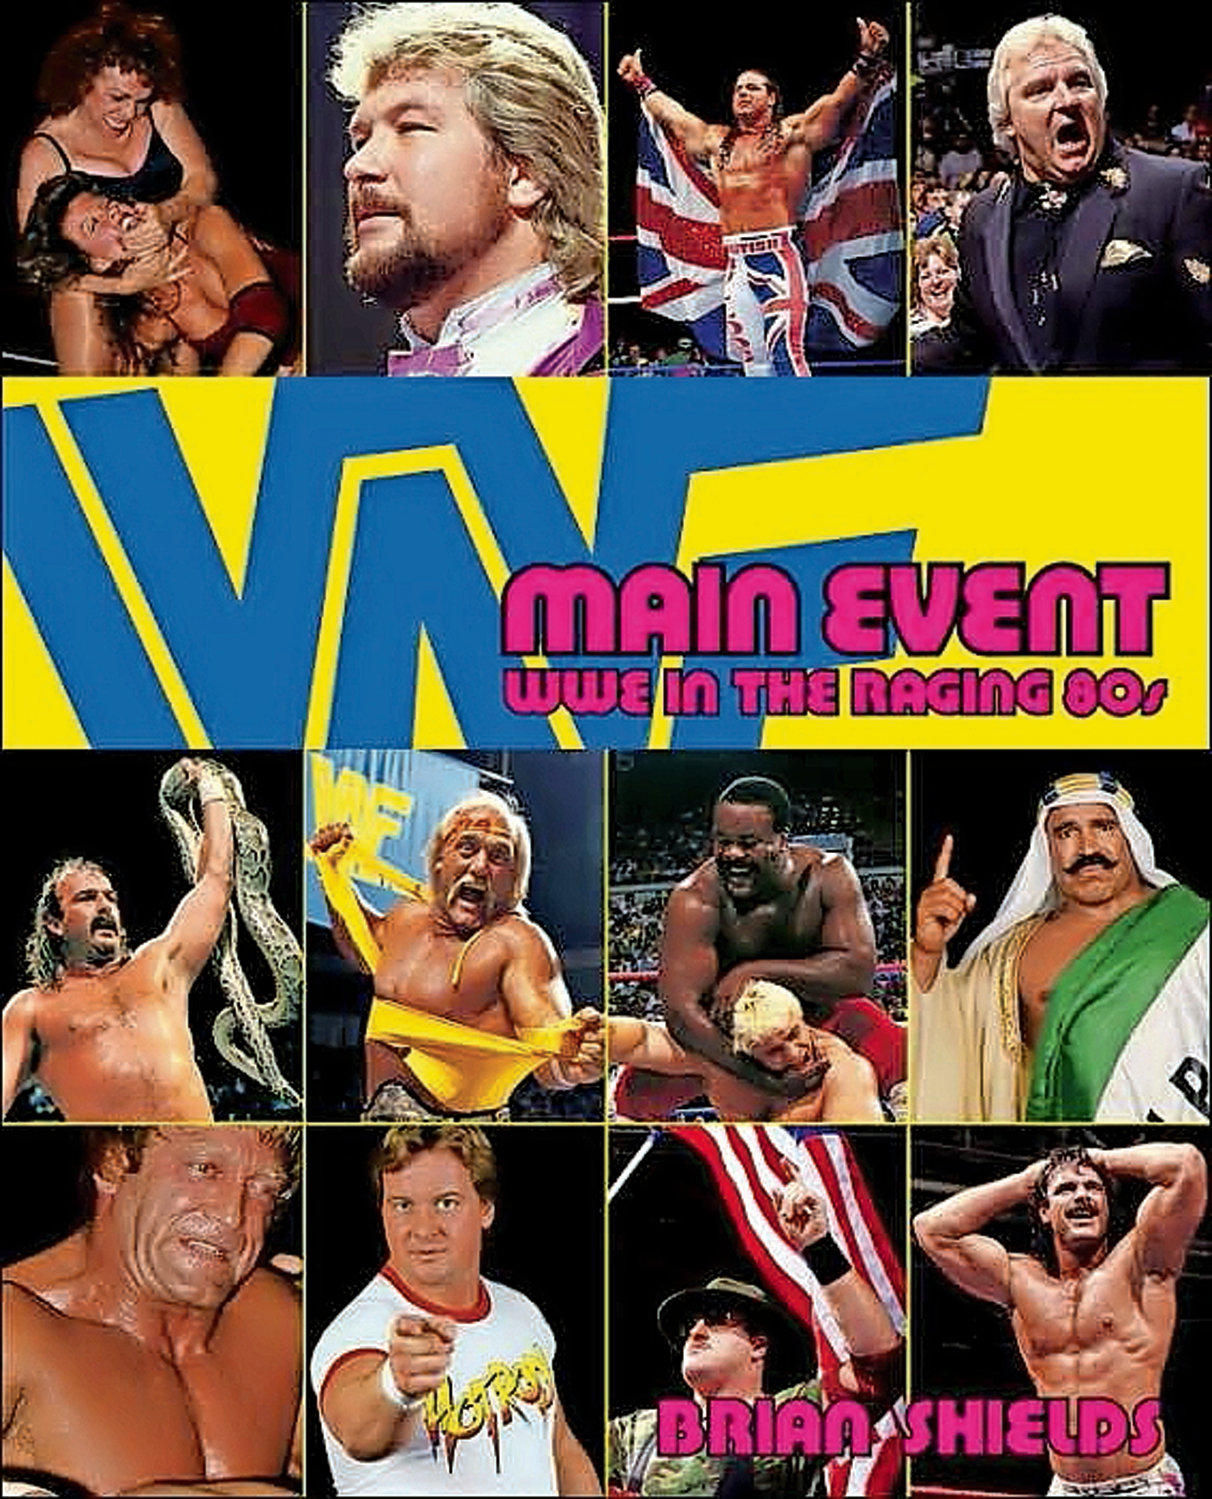 “Main Event: WWE in the Raging ‘80s” was the first book that Brian Shields, a Rockville Centre native, published for the WWE in 2006.